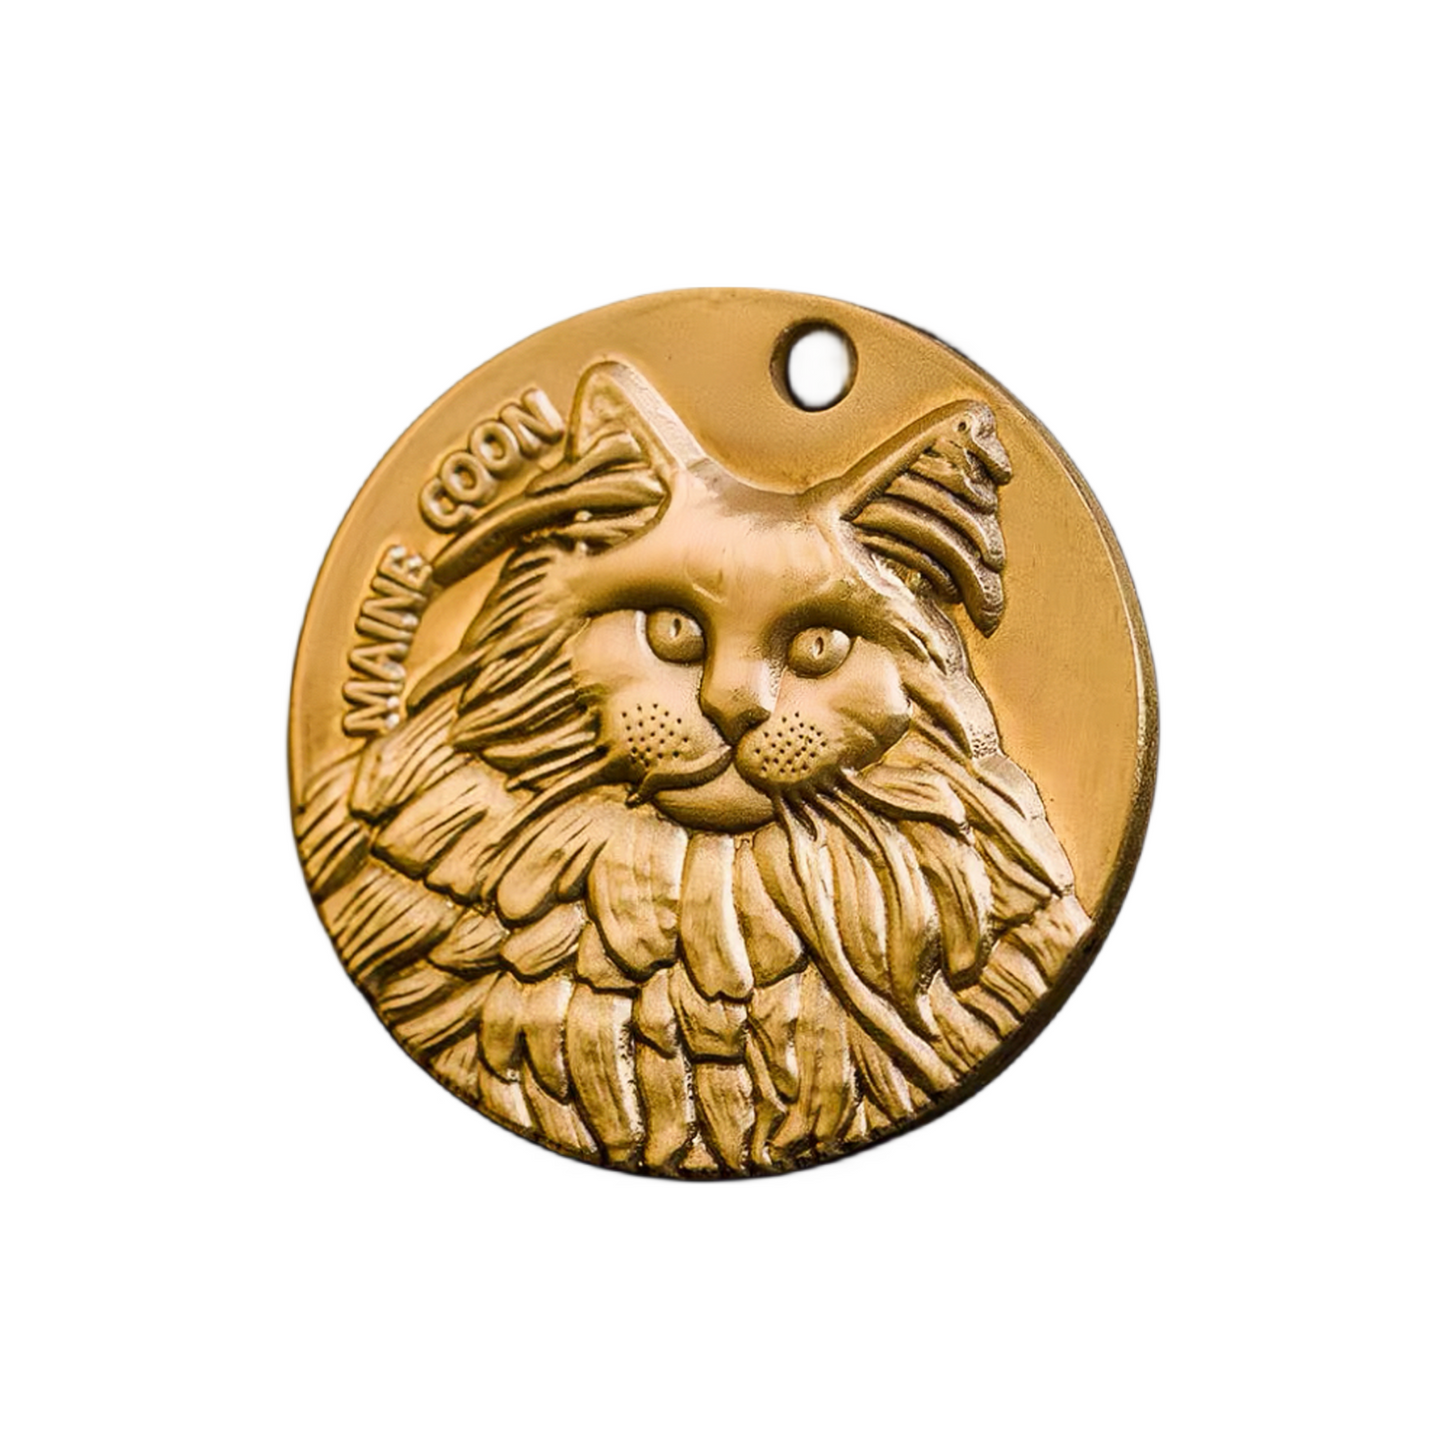 Cat Tag ID  Pet Collar Cat Tag Name and Message Pet Information Customization and Carving